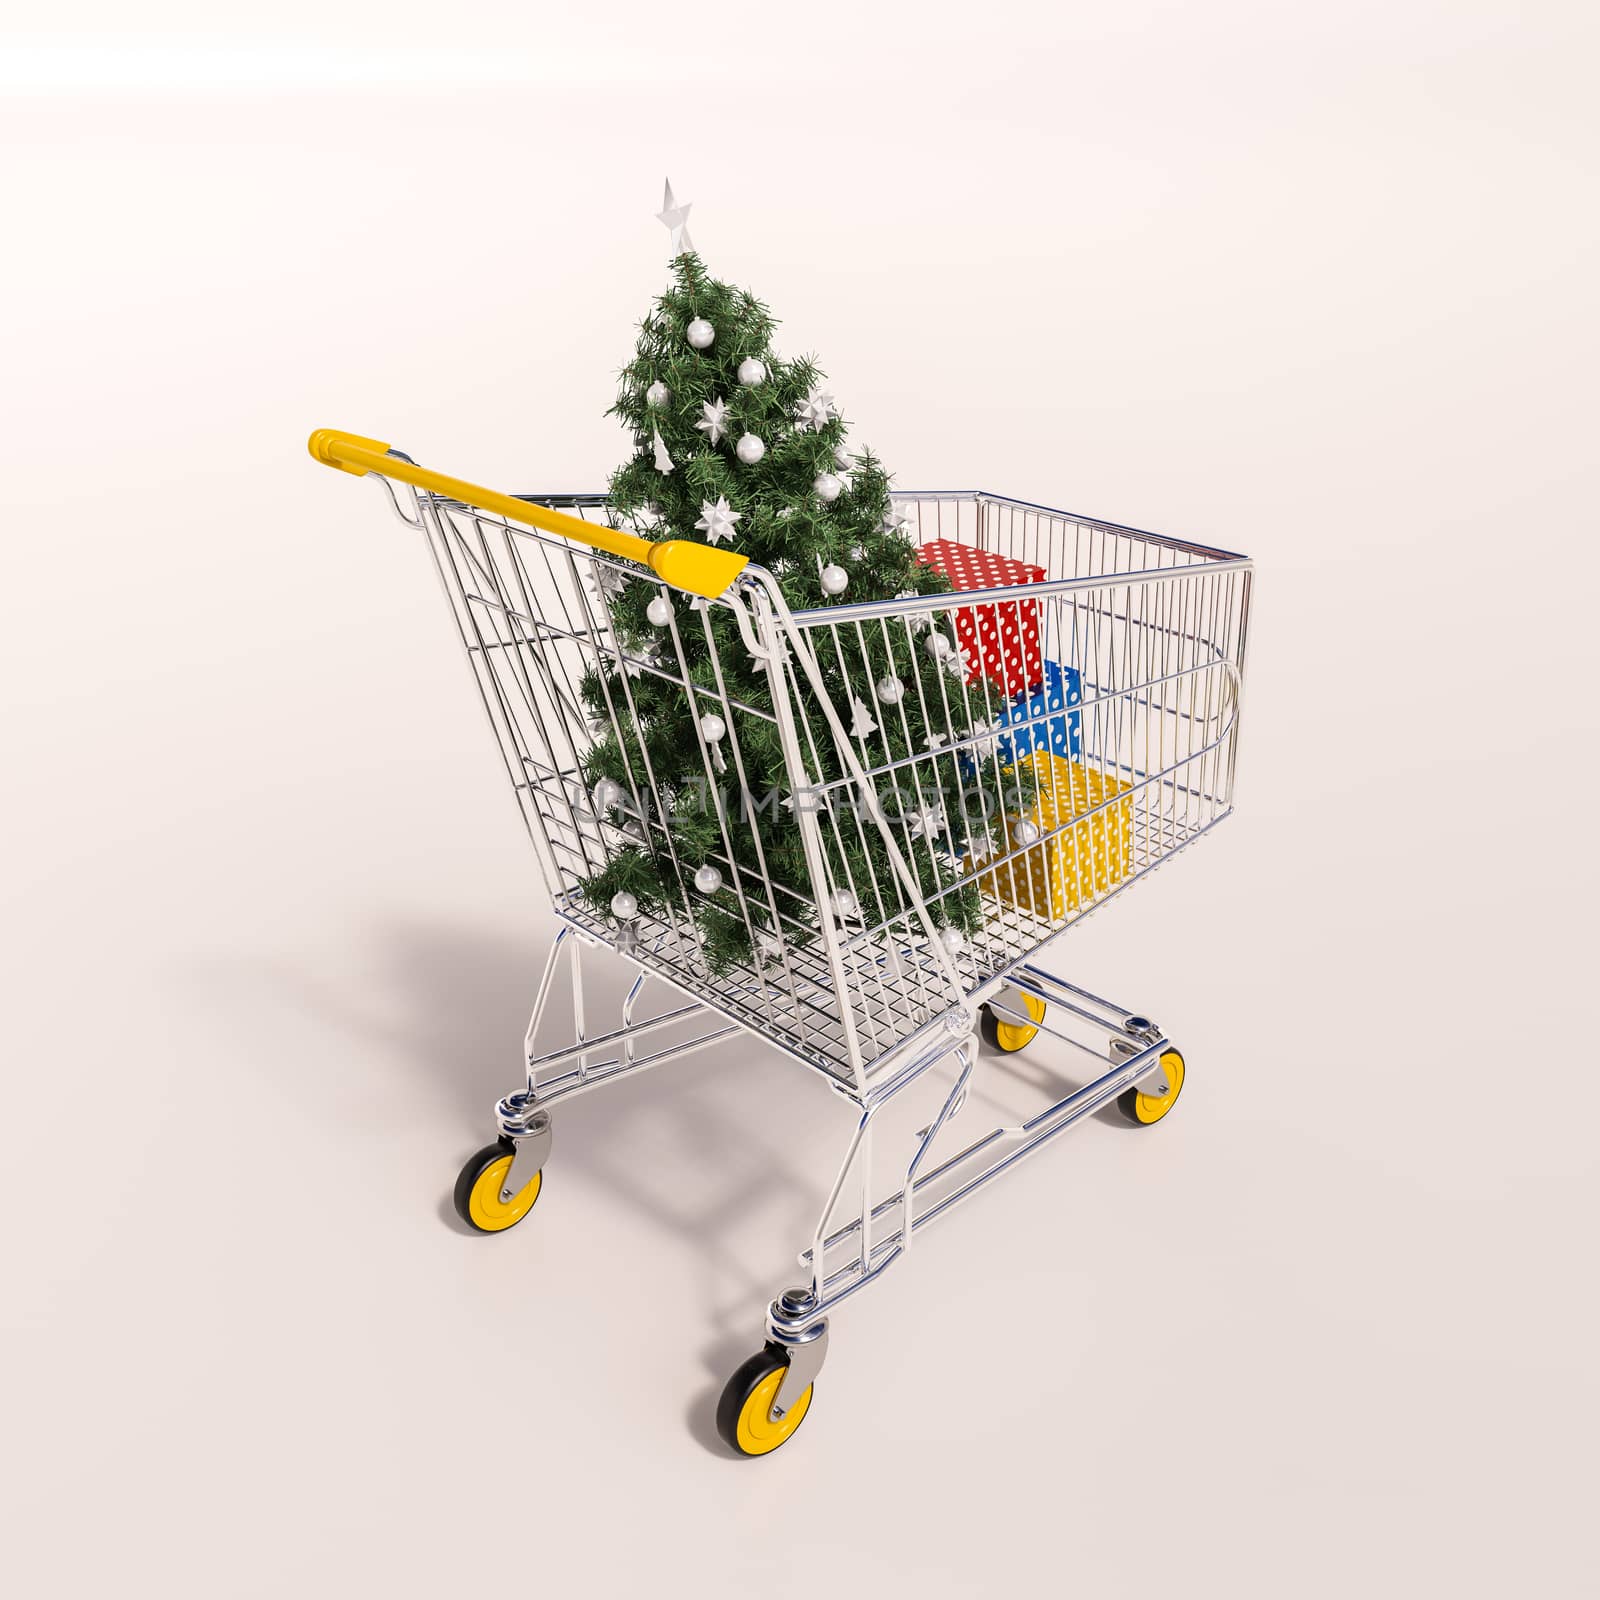 Shopping cart full of purchases in packages and Christamas tree by Supertooper